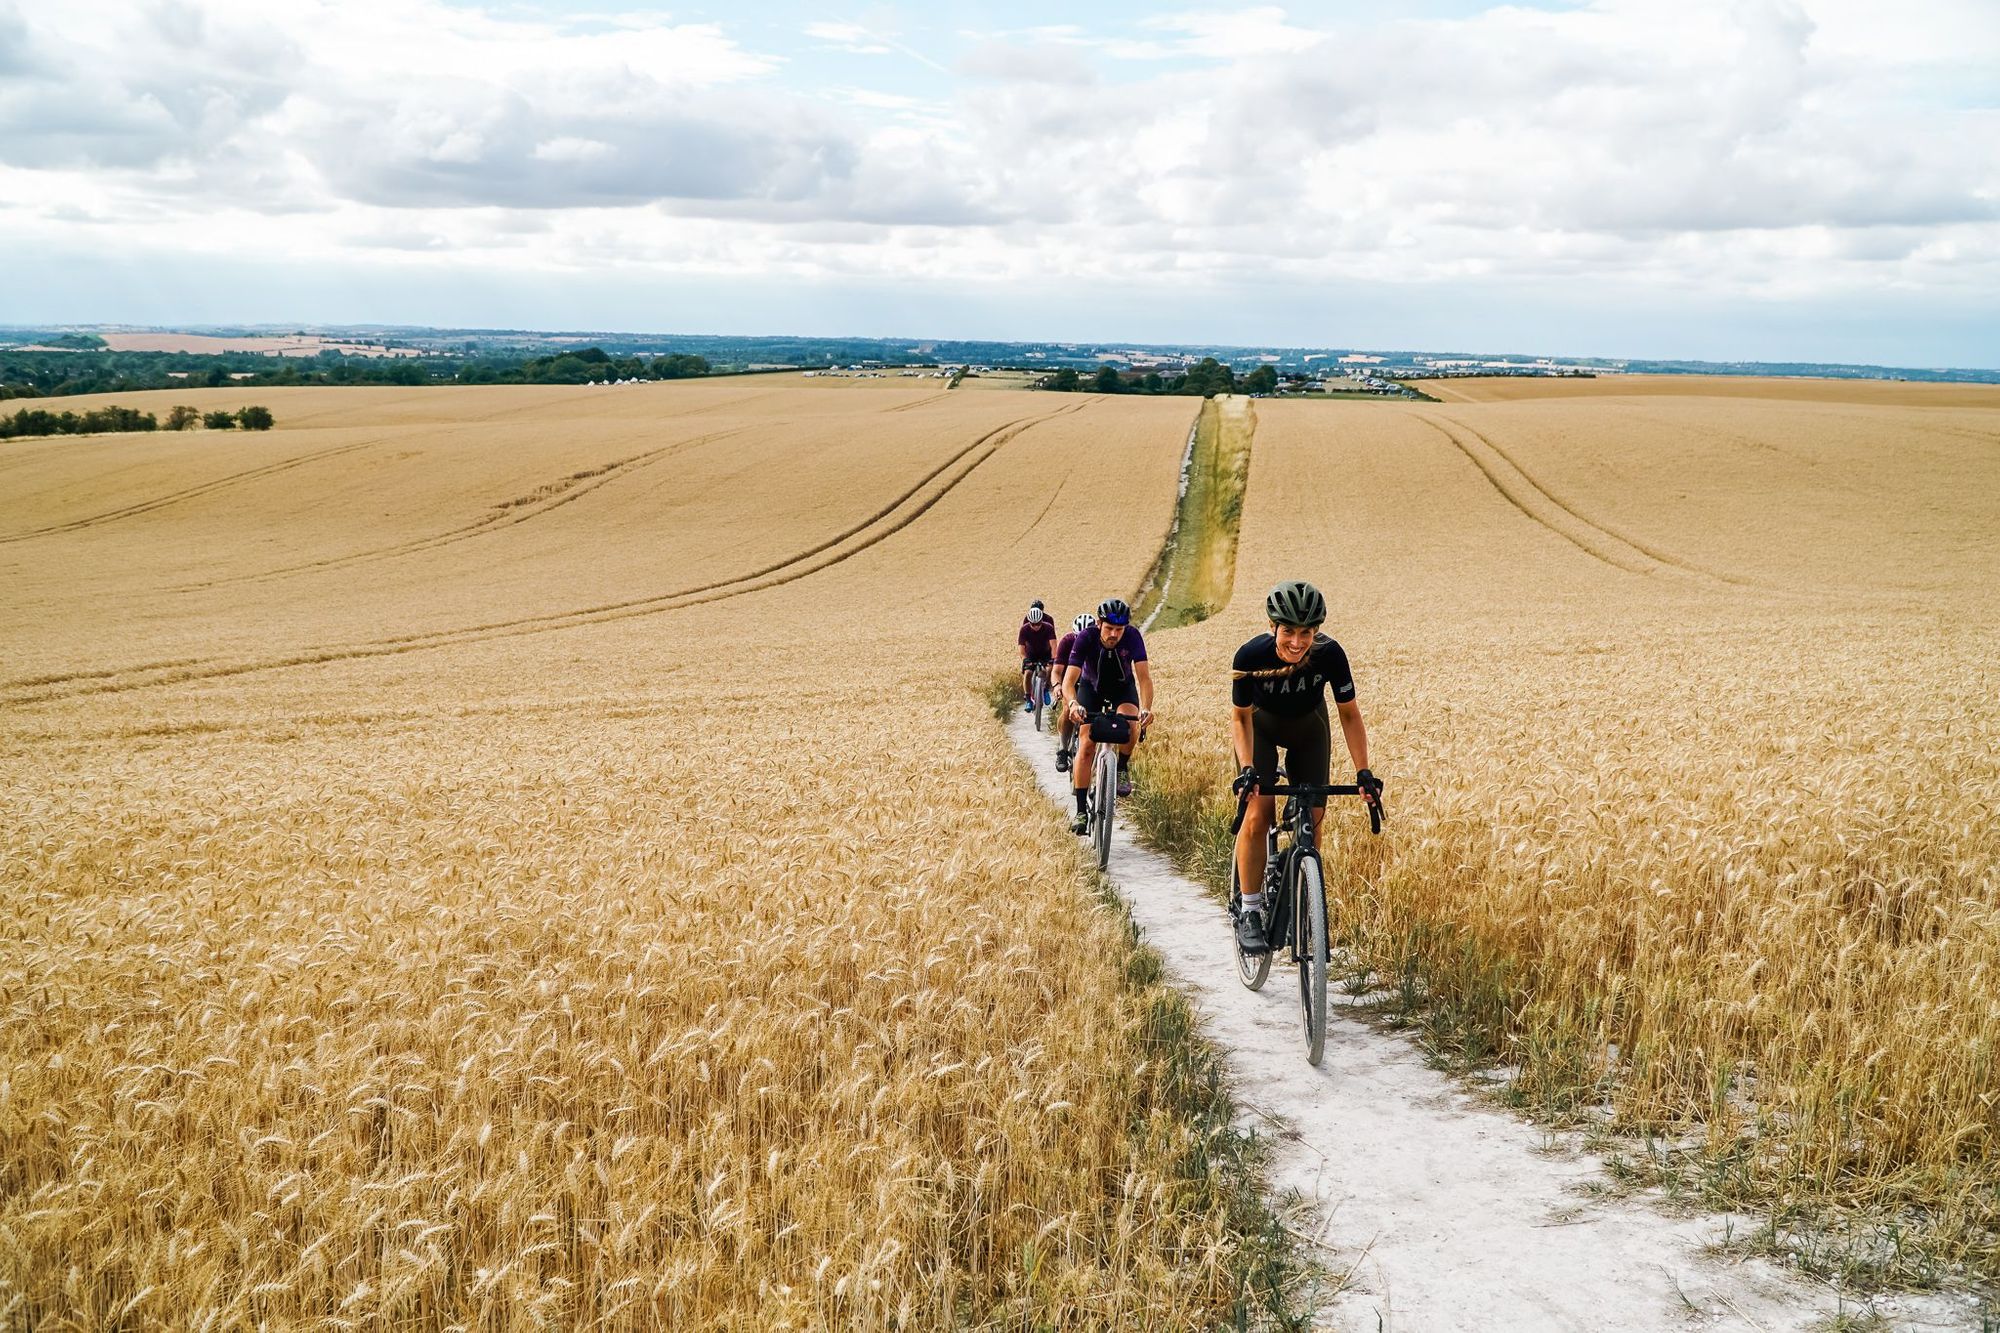 A beautiful chalk route through the fields of wheat which line the ridgeway, Britain's oldest road. Photo: Wild Cycles